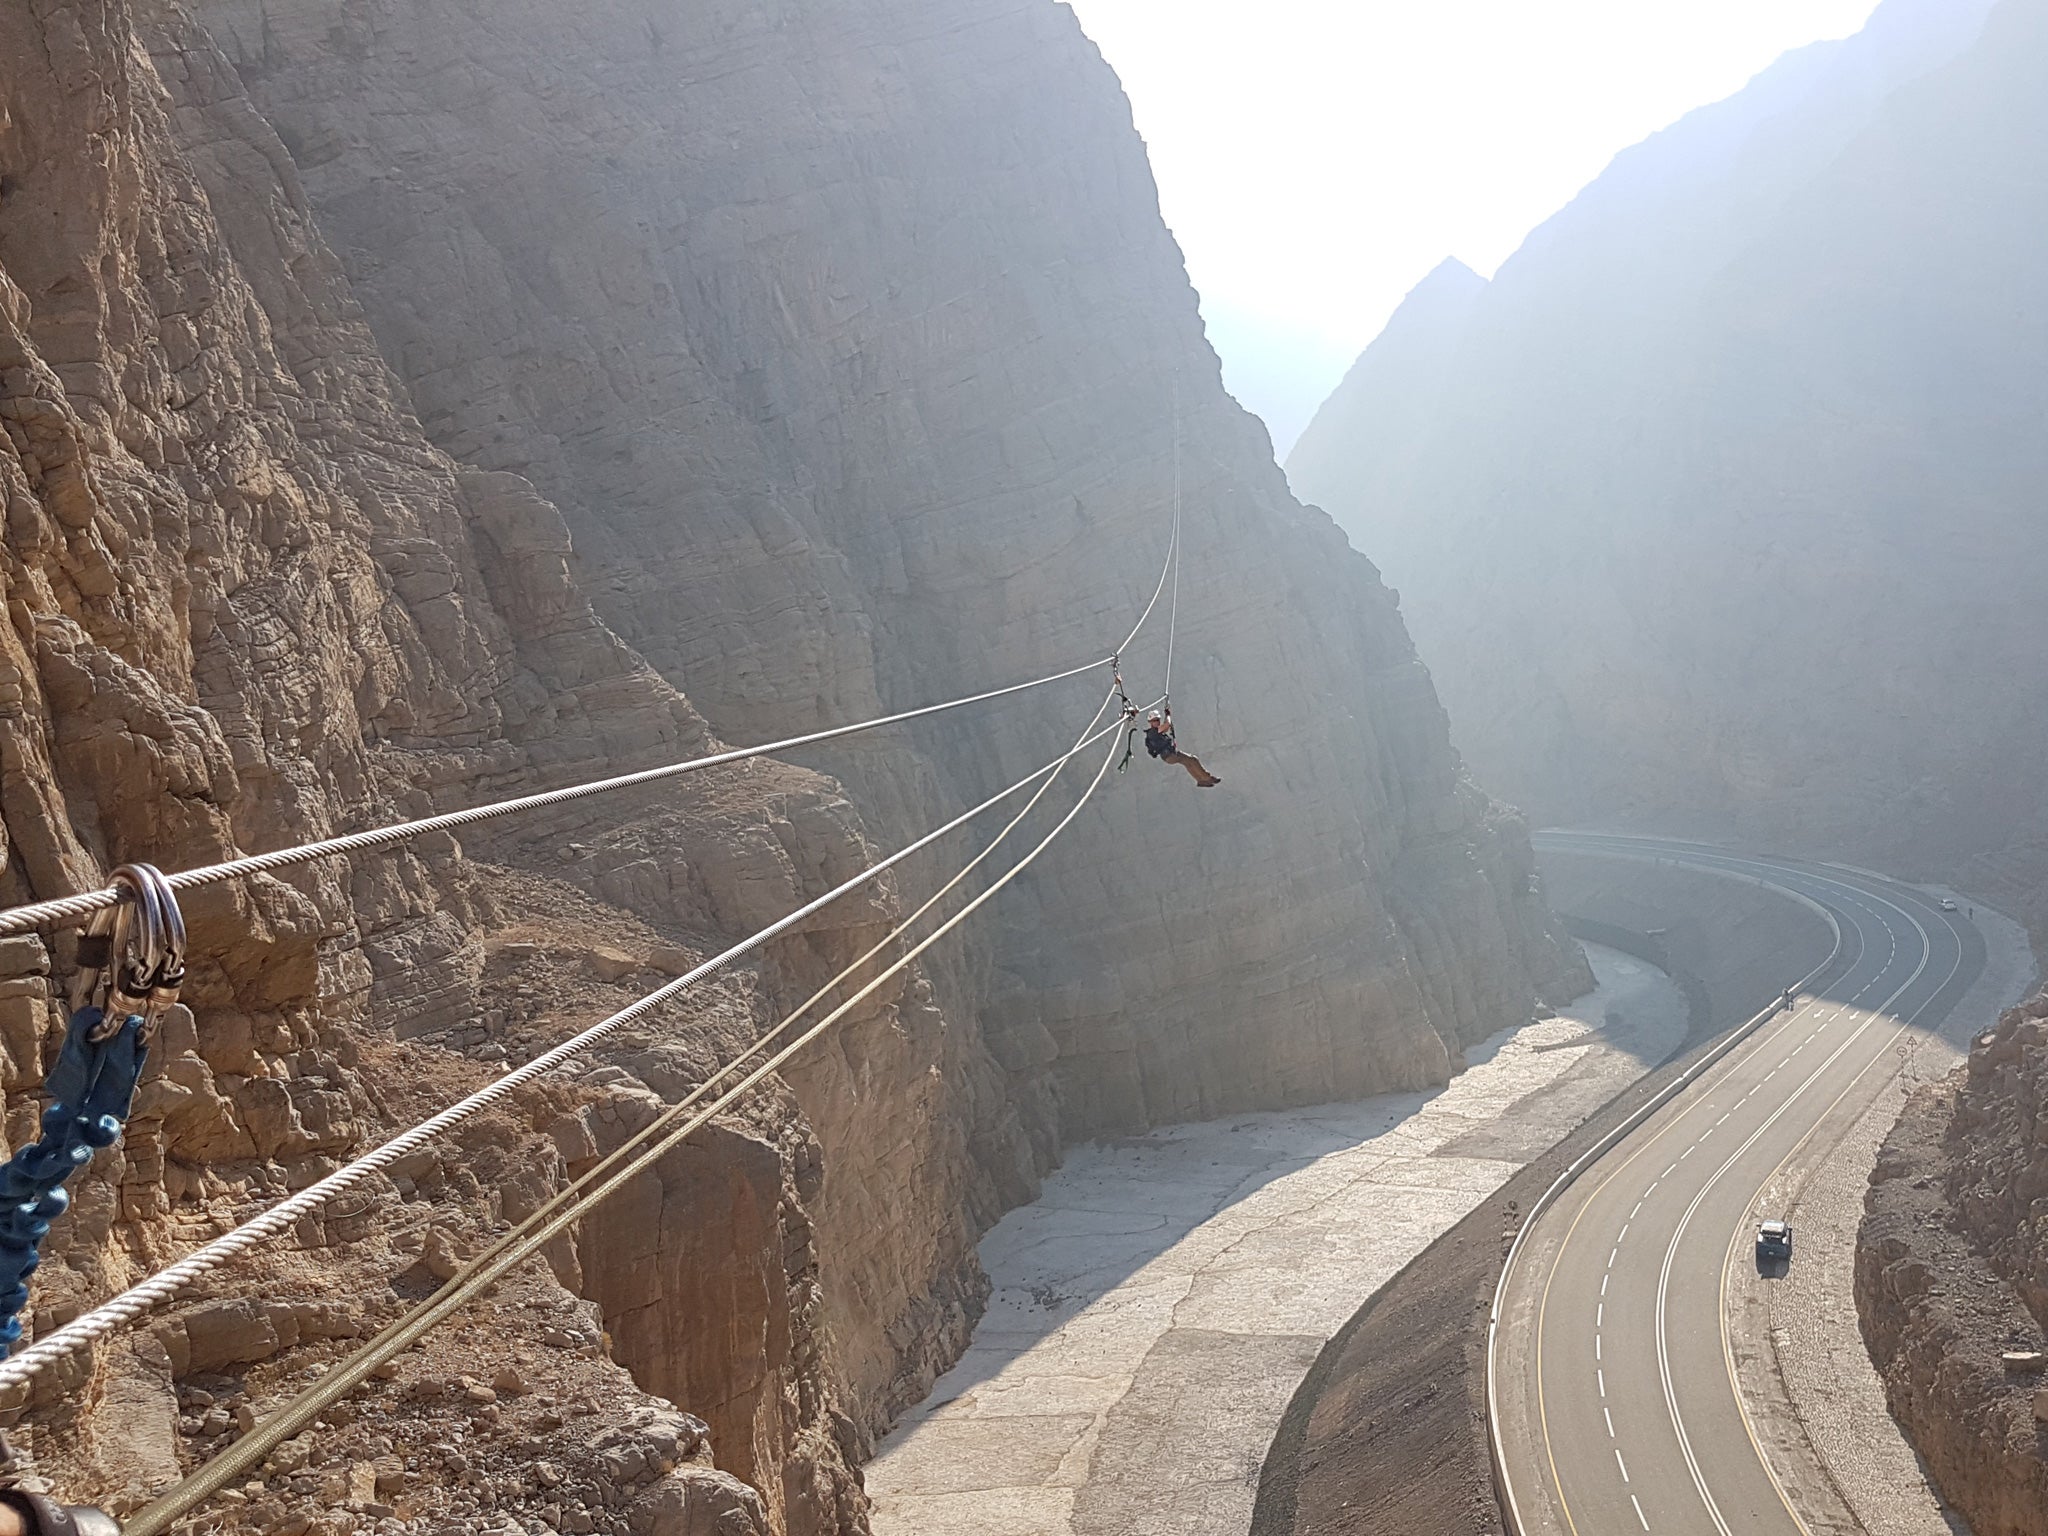 The 300m zipline runs in full view of the road leading to the summit